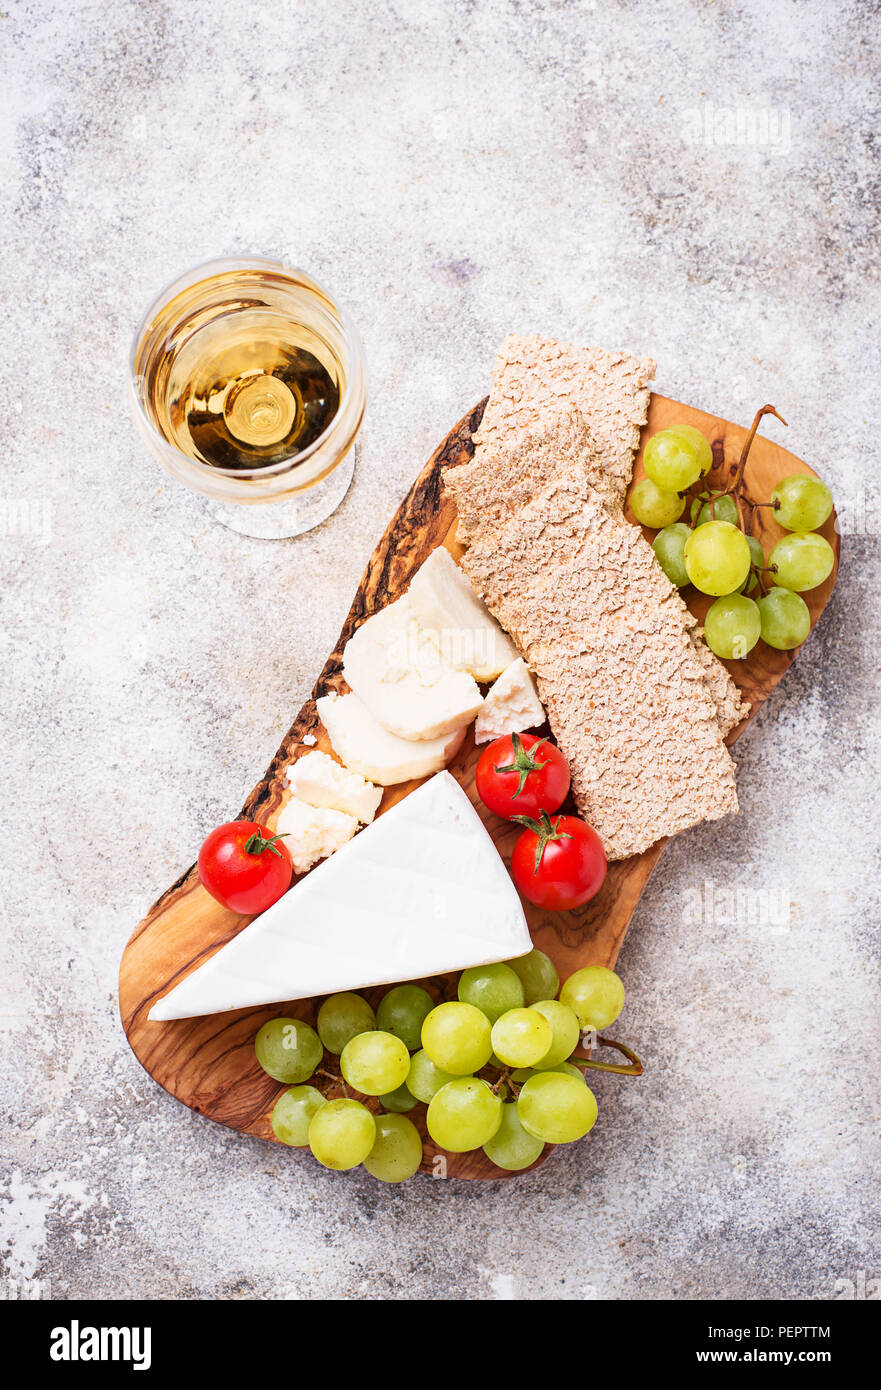 Cheese plate with brie, grape and wine Stock Photo